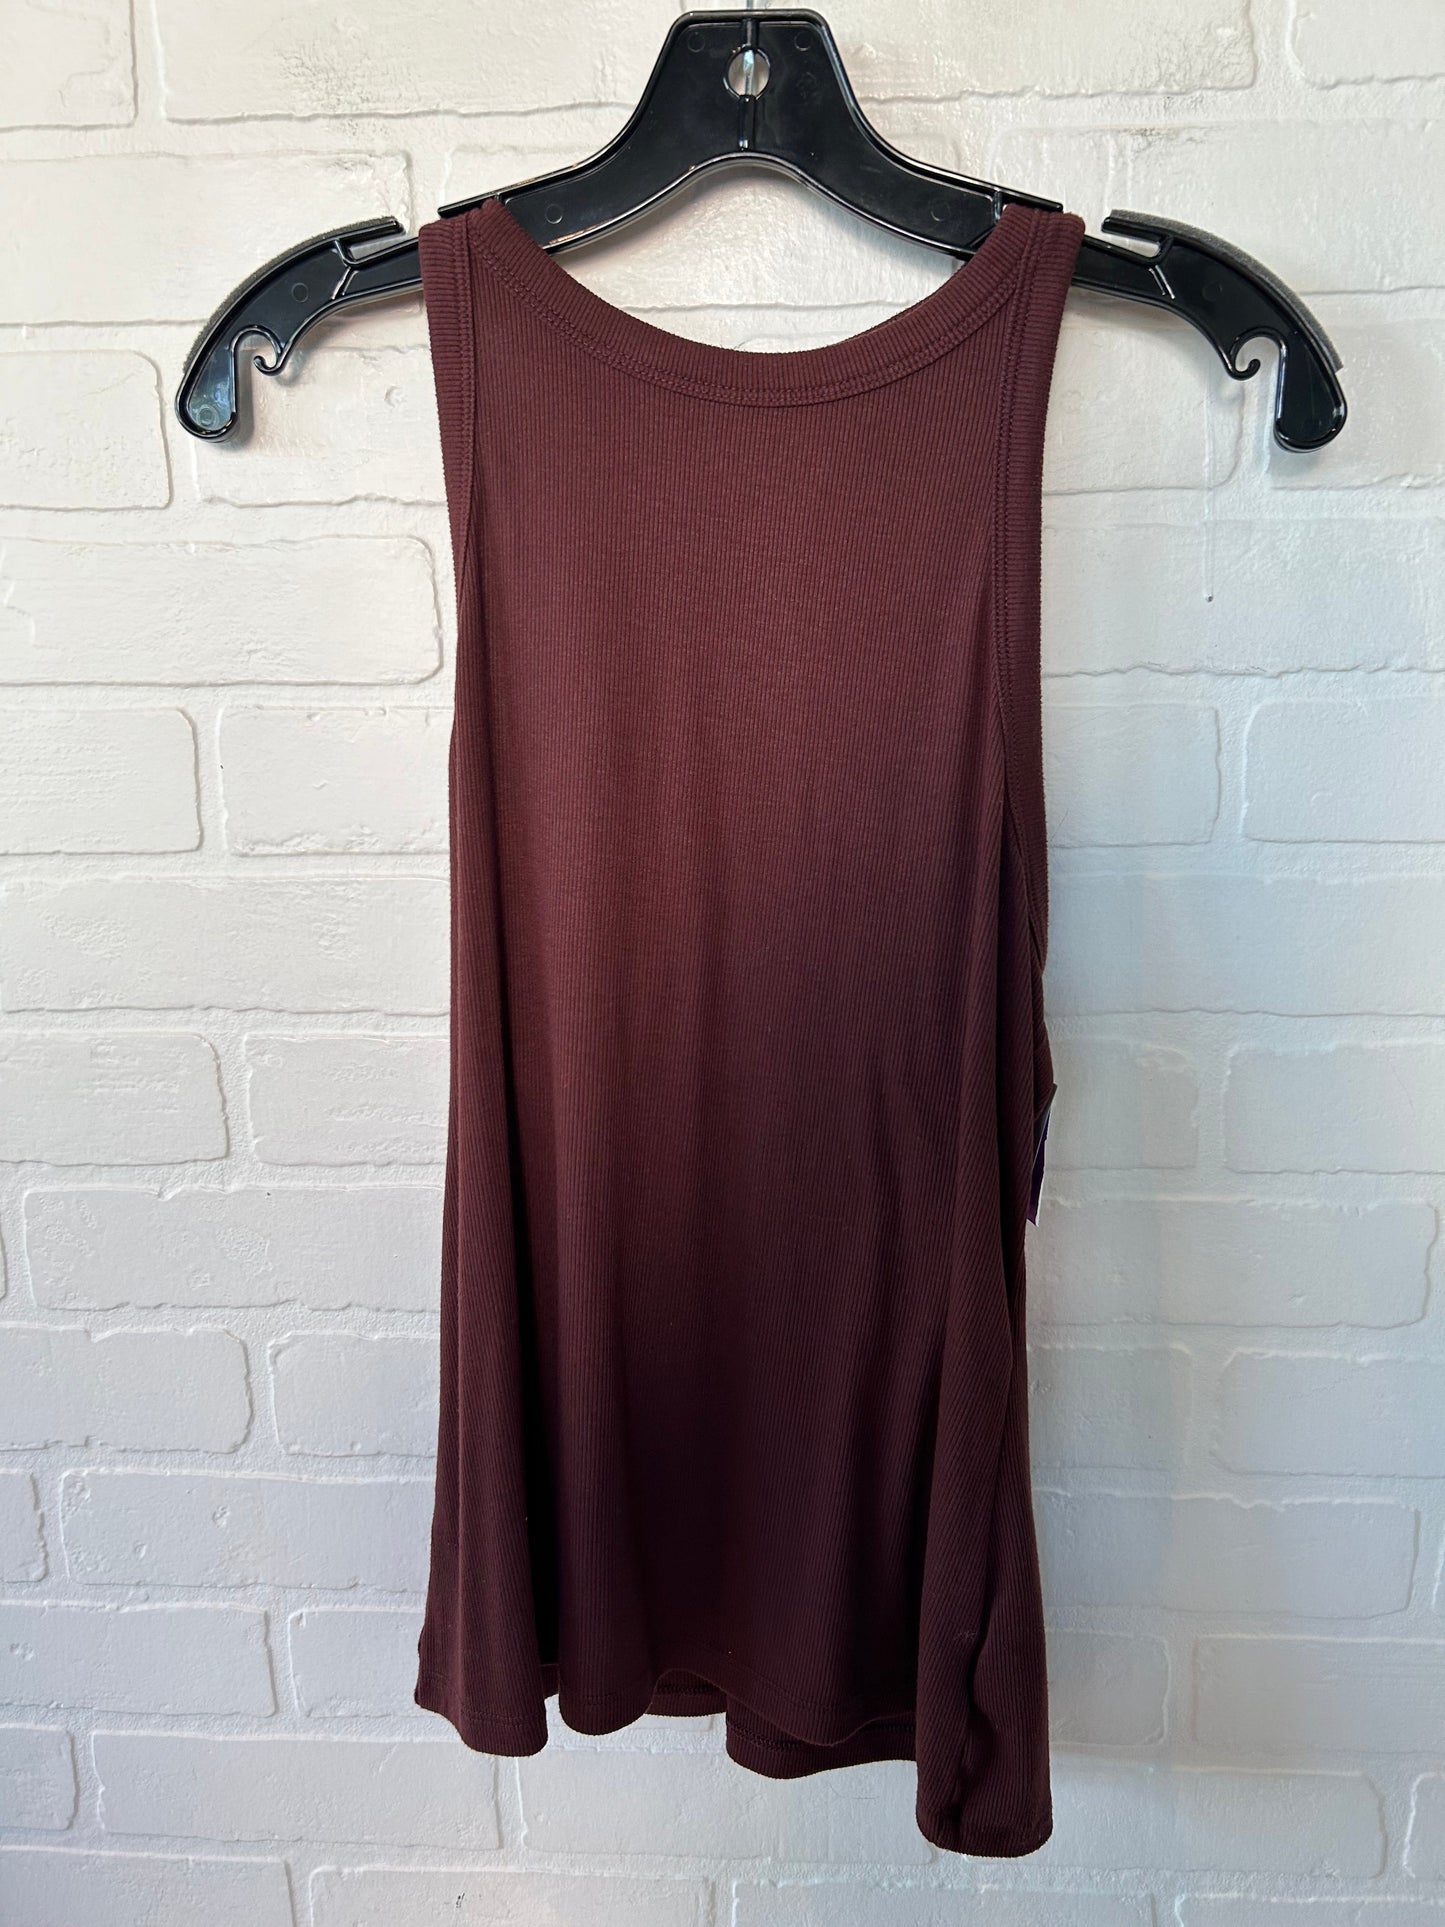 Brown Tank Top Old Navy, Size M